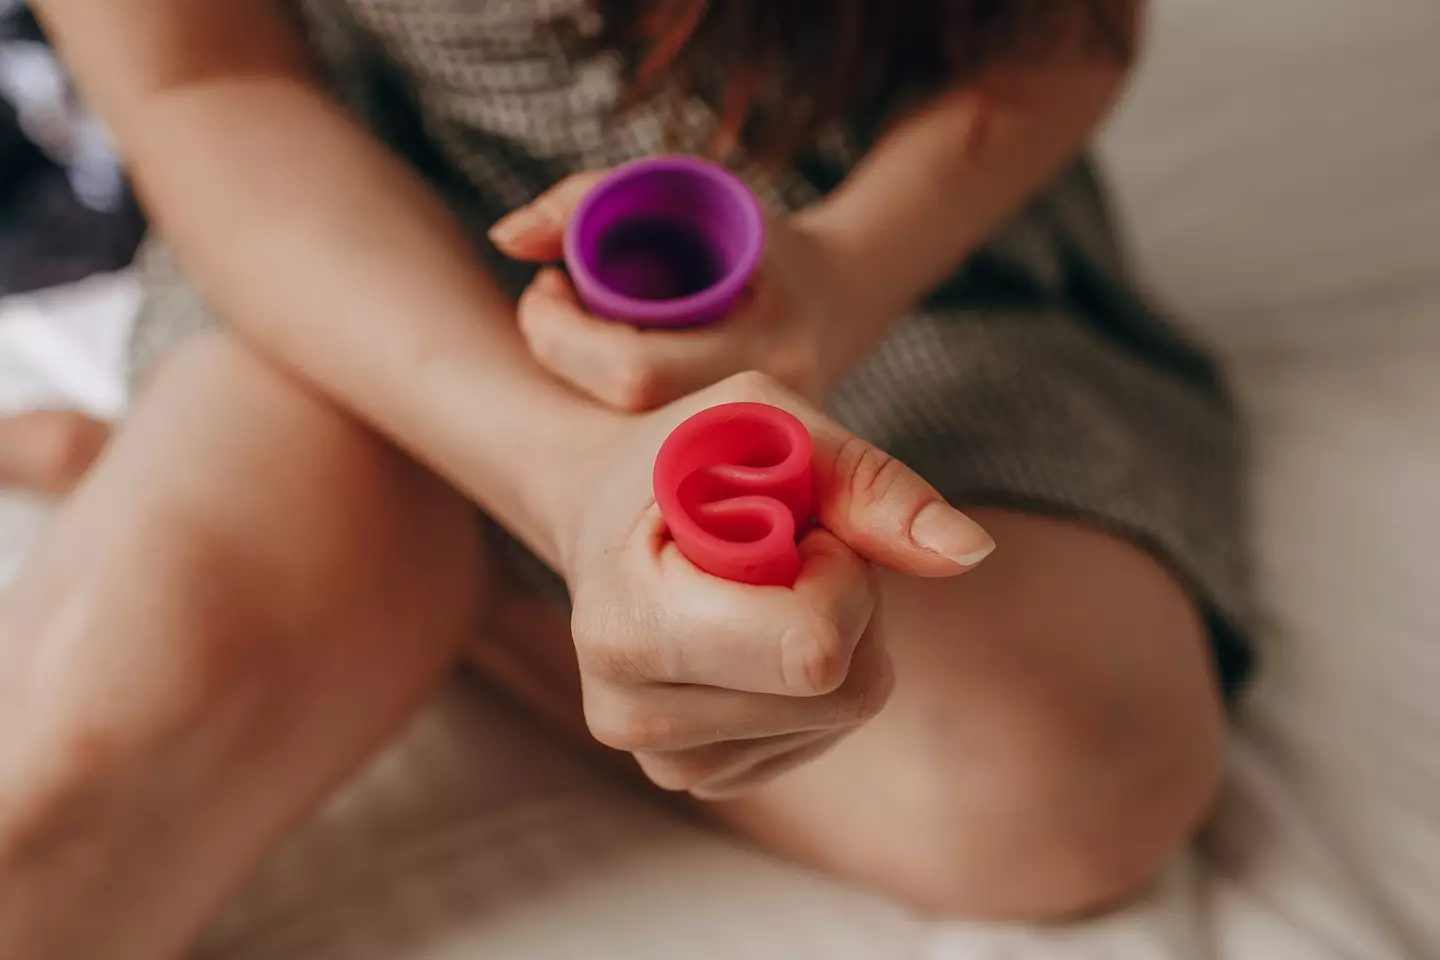 Leaving in a menstrual cup for too long can also cause TSS. (Helena Lopes / 500px / Getty Images)